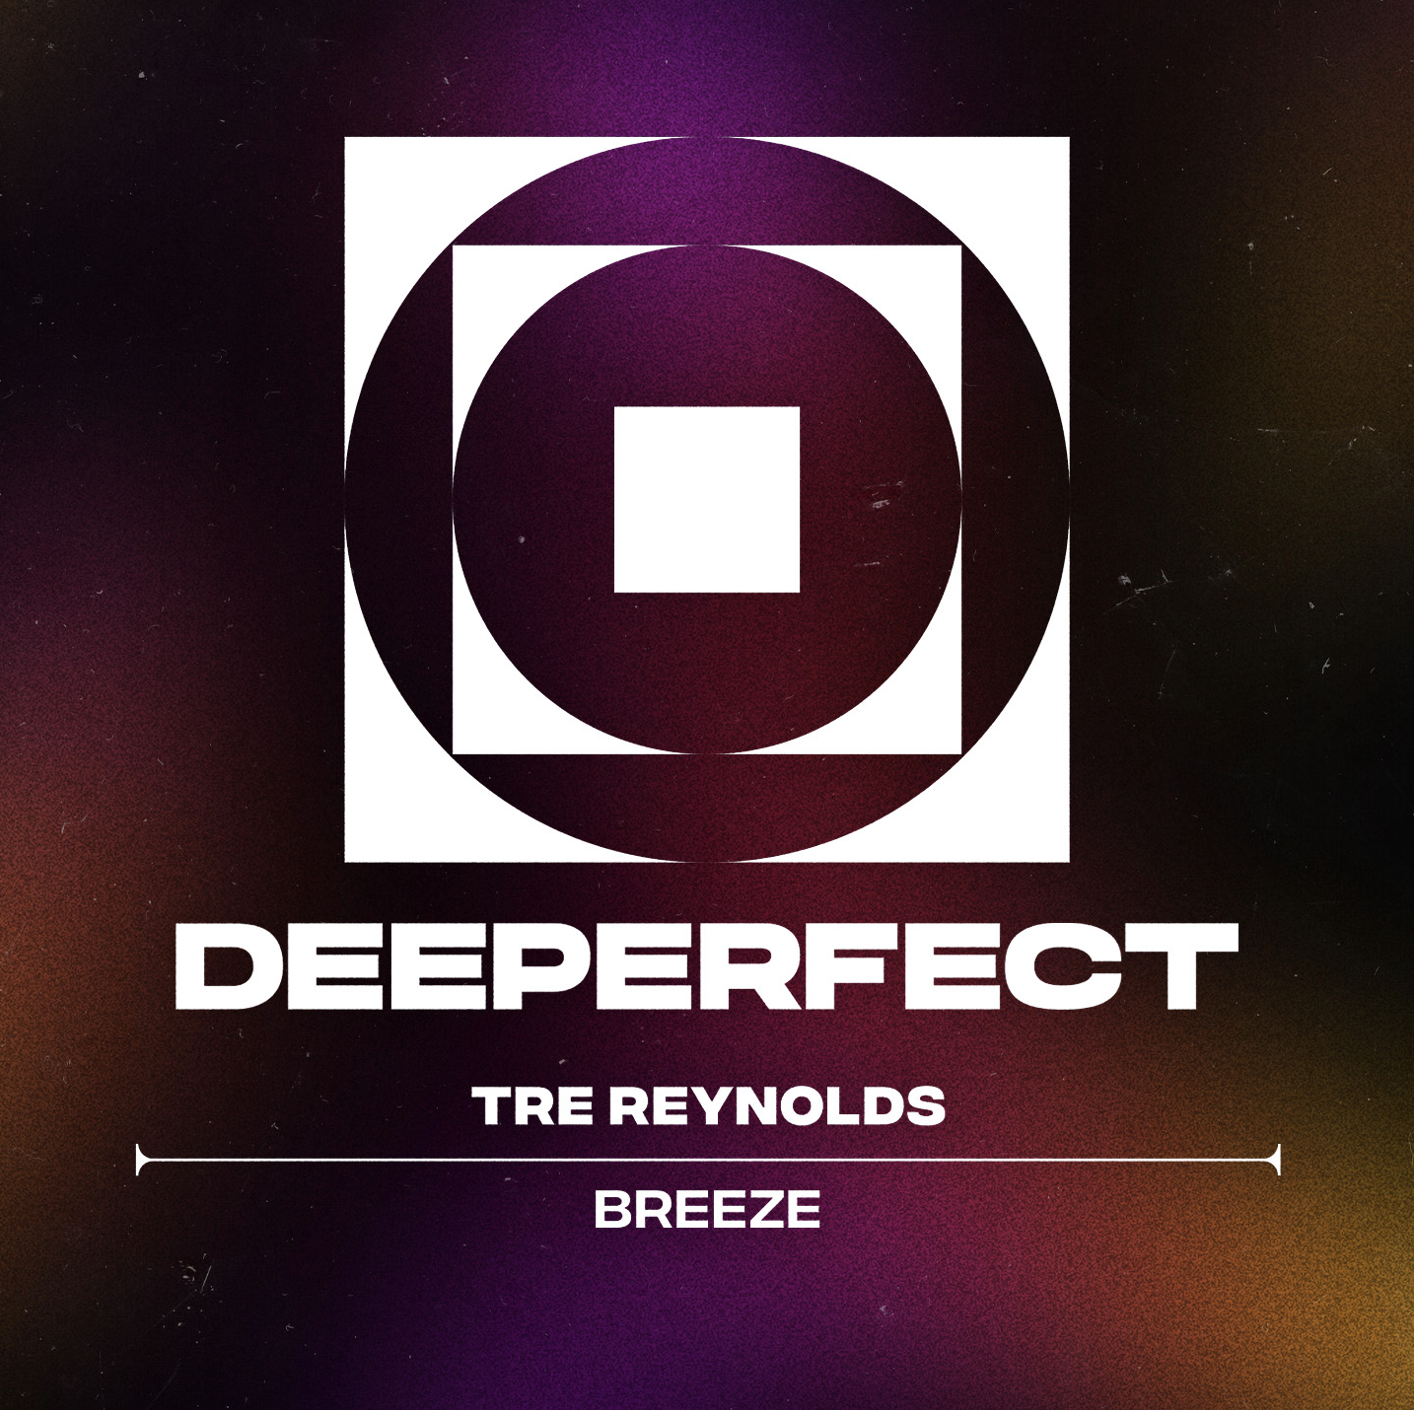 Rising UK dance star Tre Reynolds shares finely crafted new EP ‘Breeze’